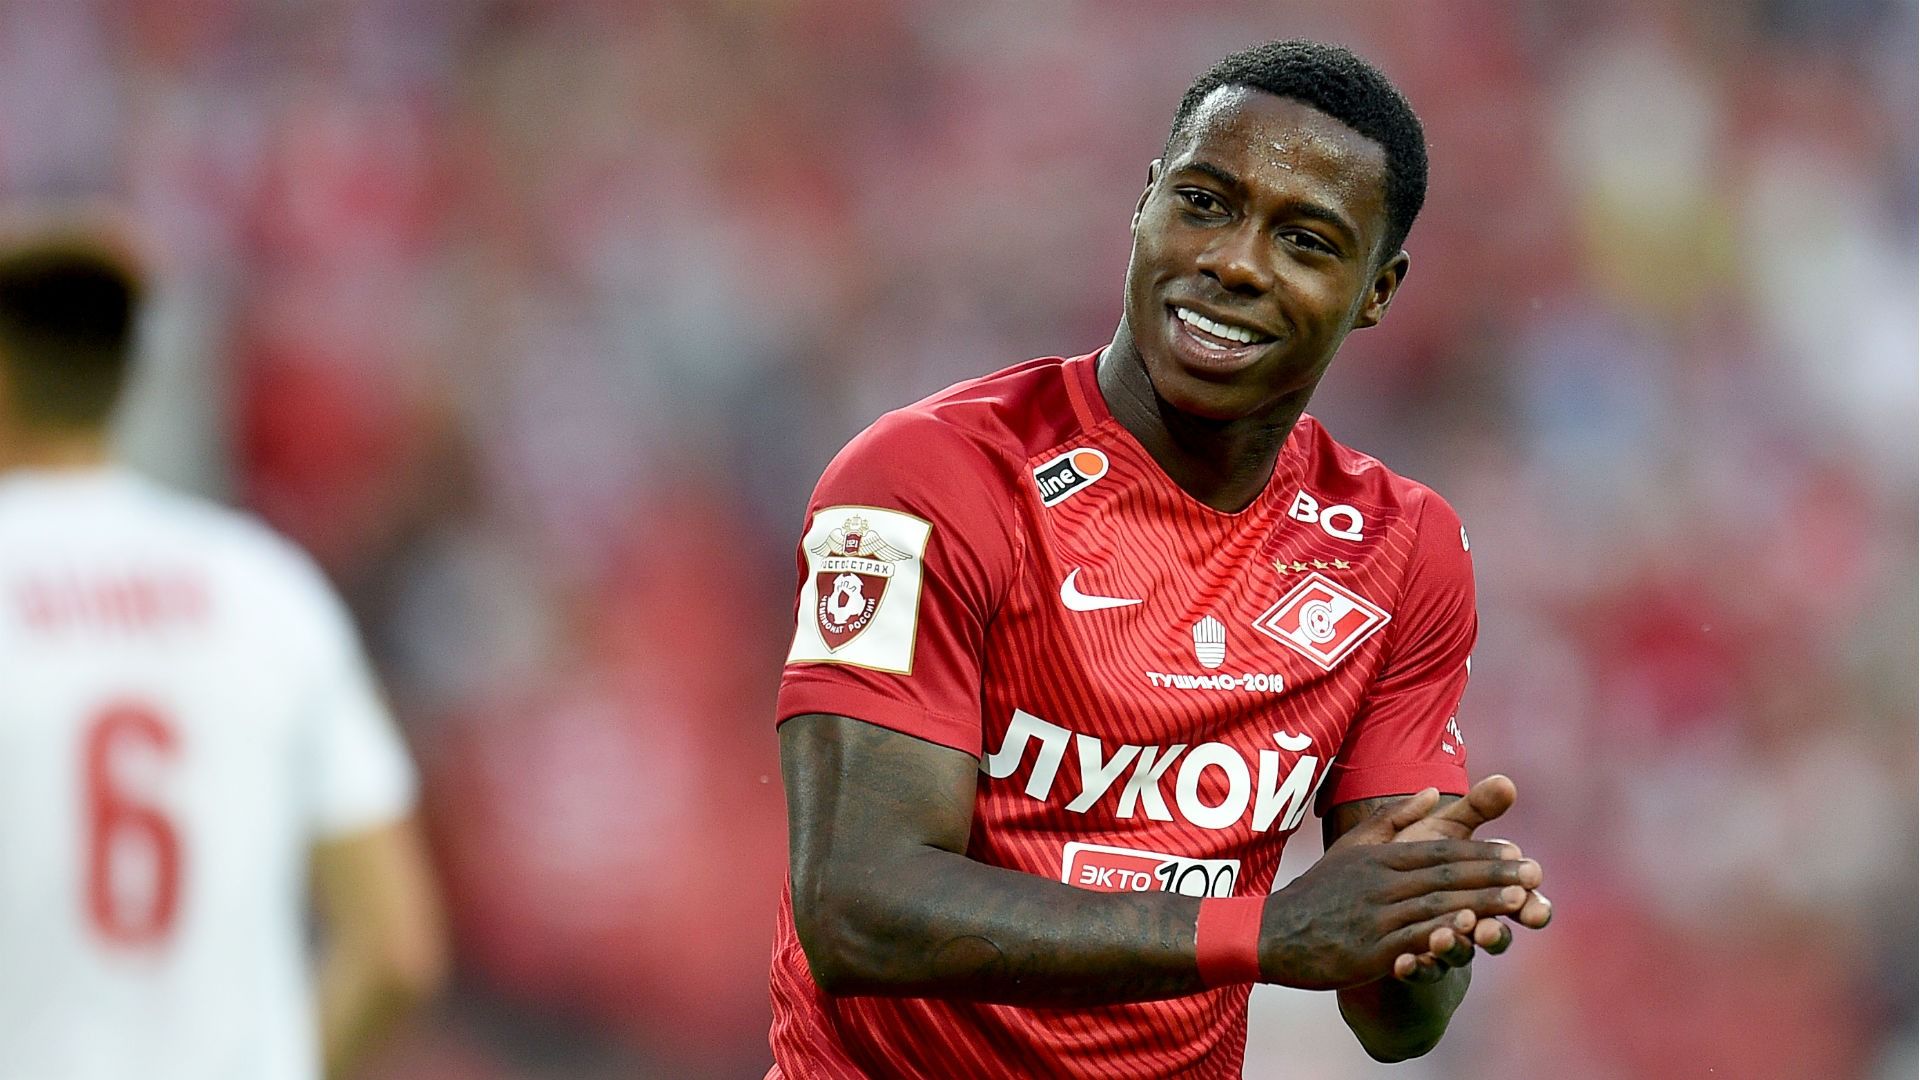 Spartak's Promes Becomes UAE Resident To Escape Dutch Extradition